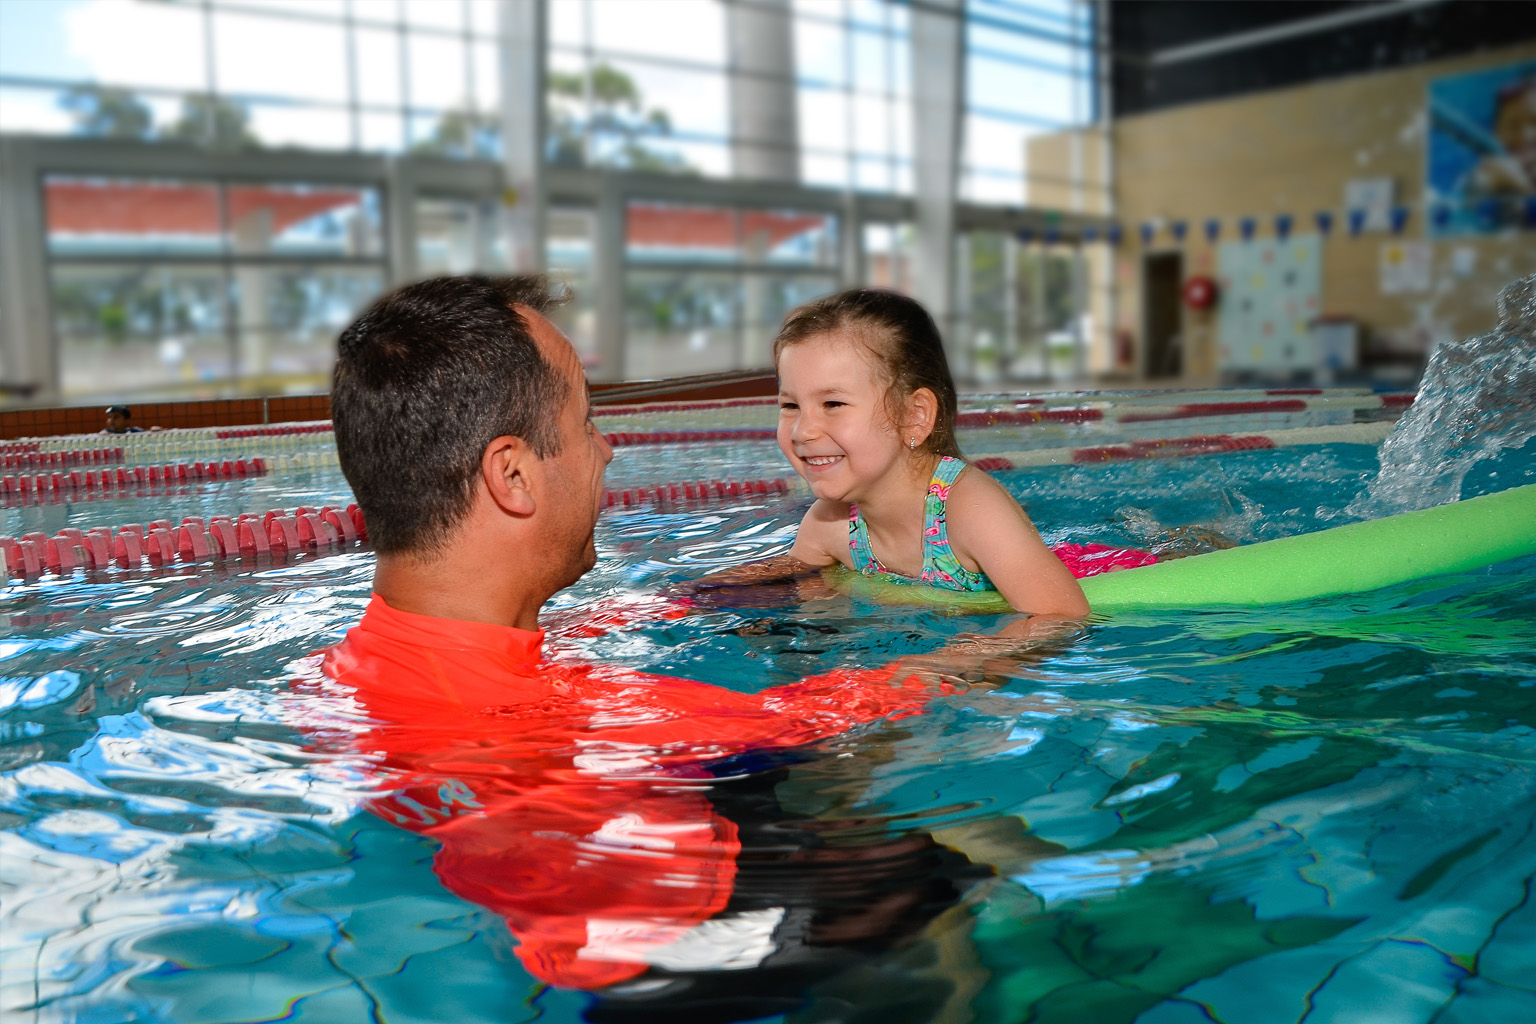 A swimming teacher helps a young child through the water.